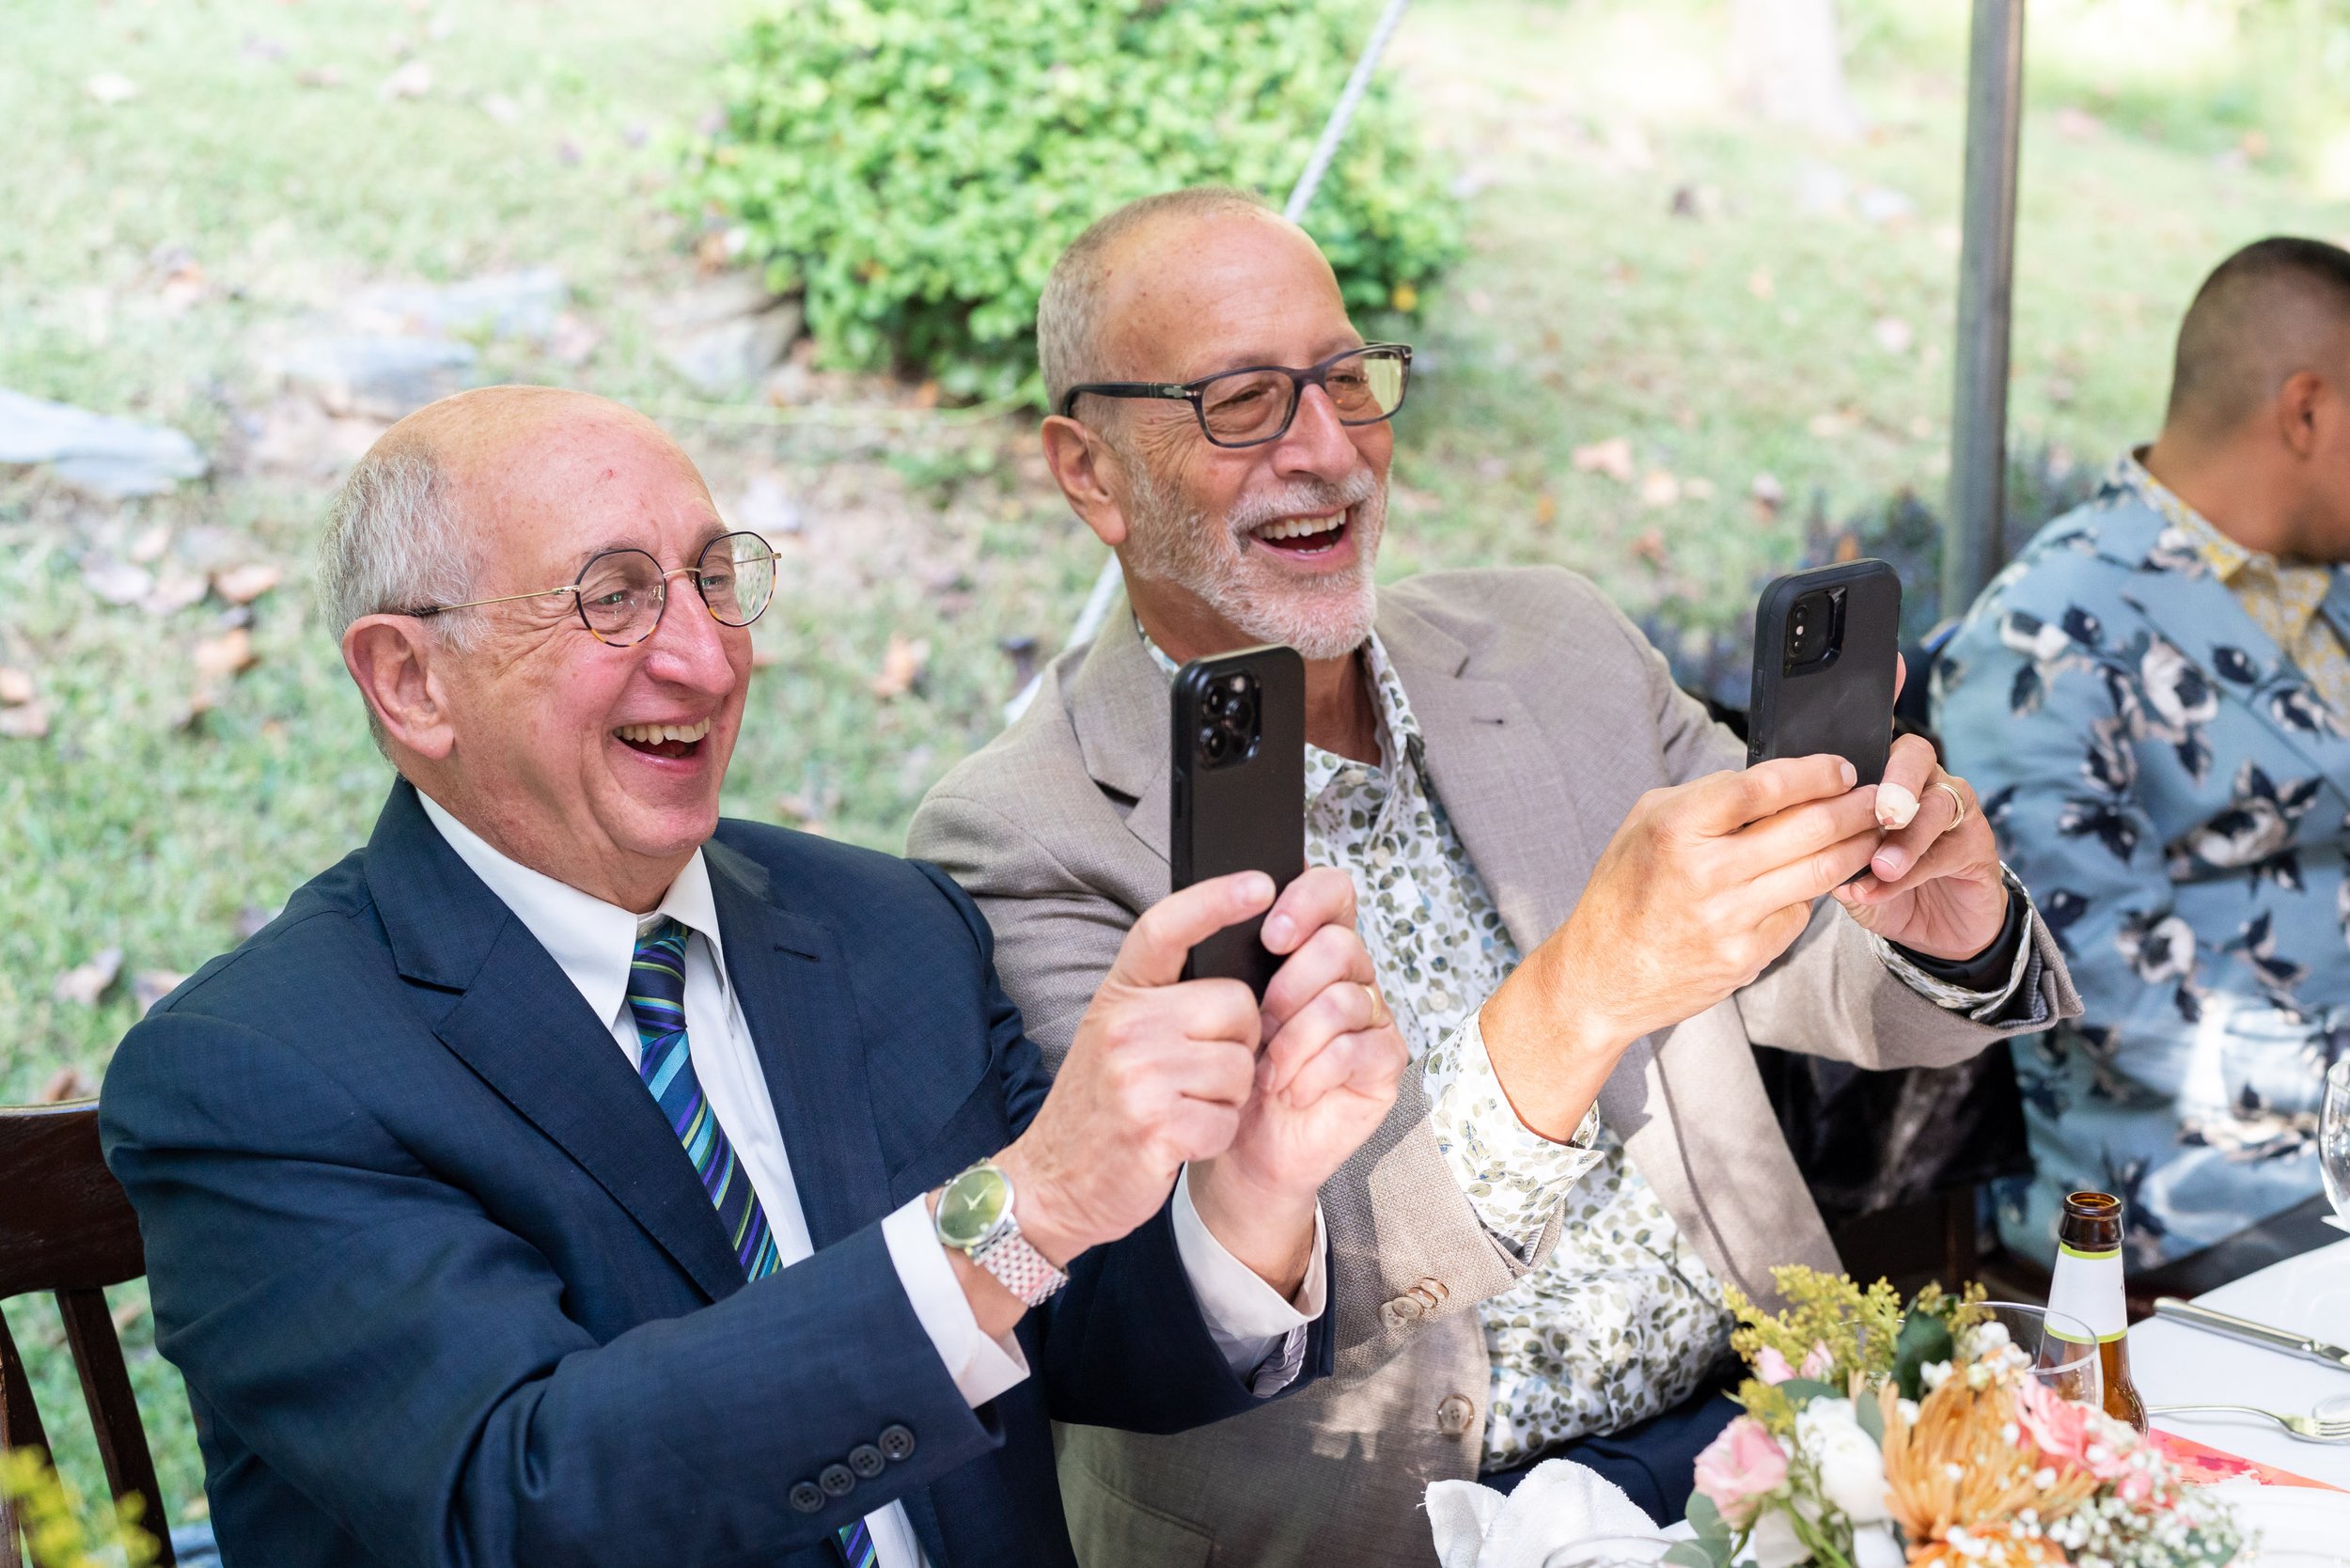 two husbands taking an identical photo and laughing at wedding